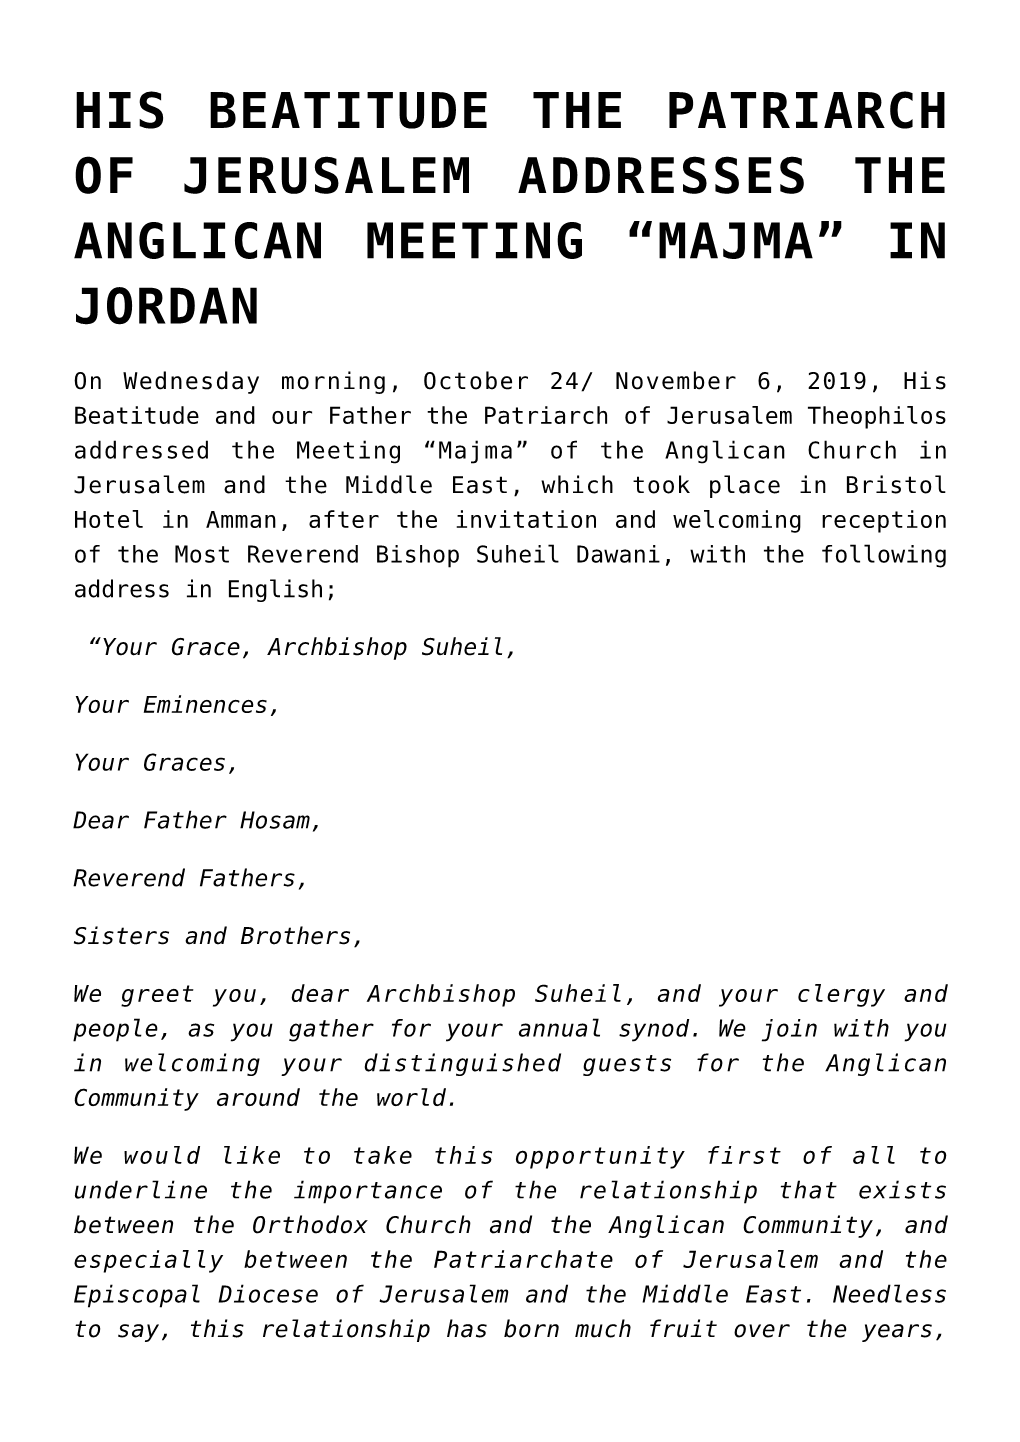 His Beatitude the Patriarch of Jerusalem Addresses the Anglican Meeting “Majma” in Jordan